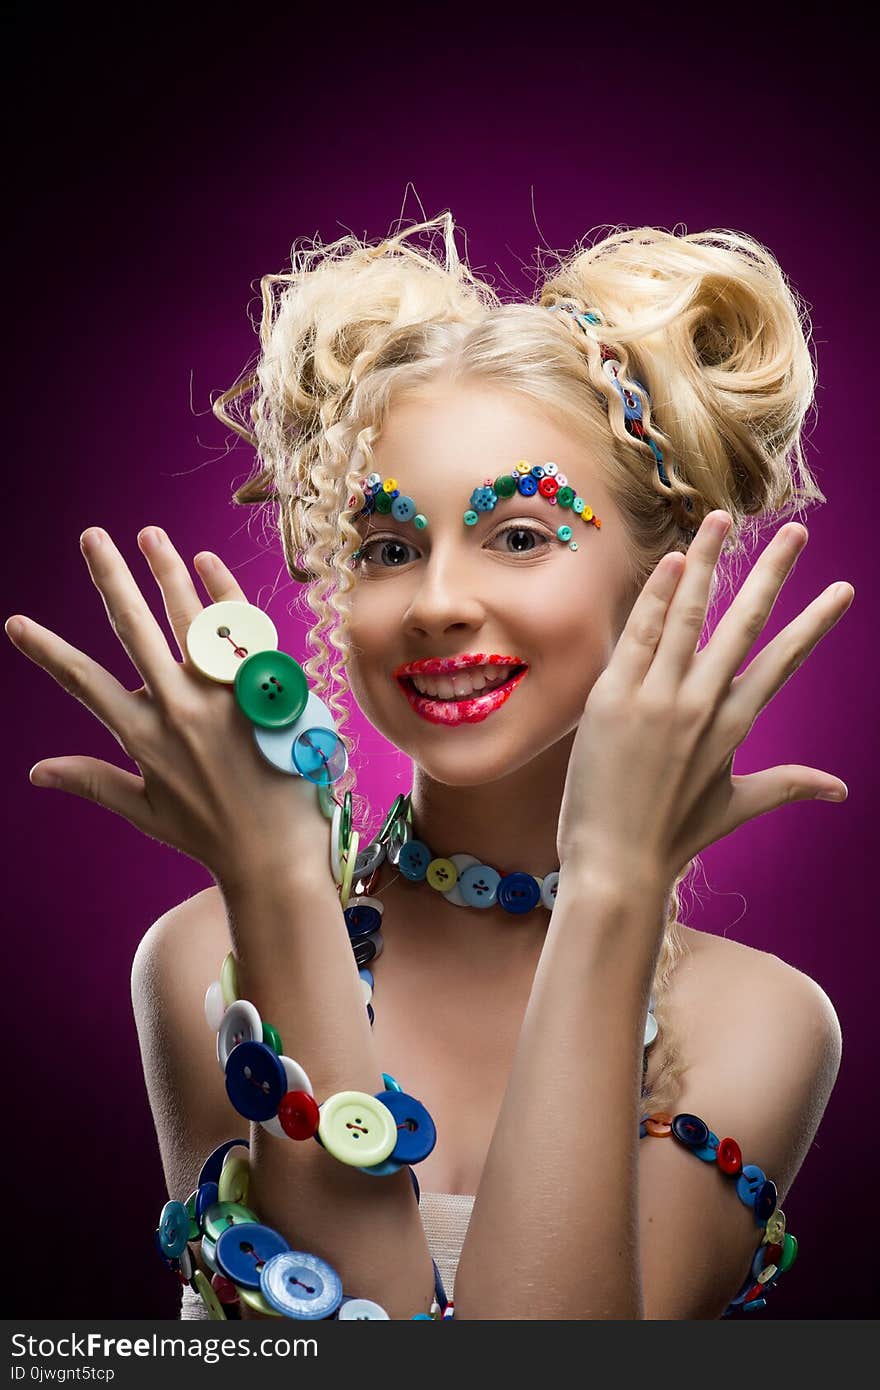 Smiling cute face nice blonde child girl wearing DIY bijou accessories made of multi-colored buttons shows her palms. Funny make-up and pasted buttons on her eyebrows. Pink background. Copy space.